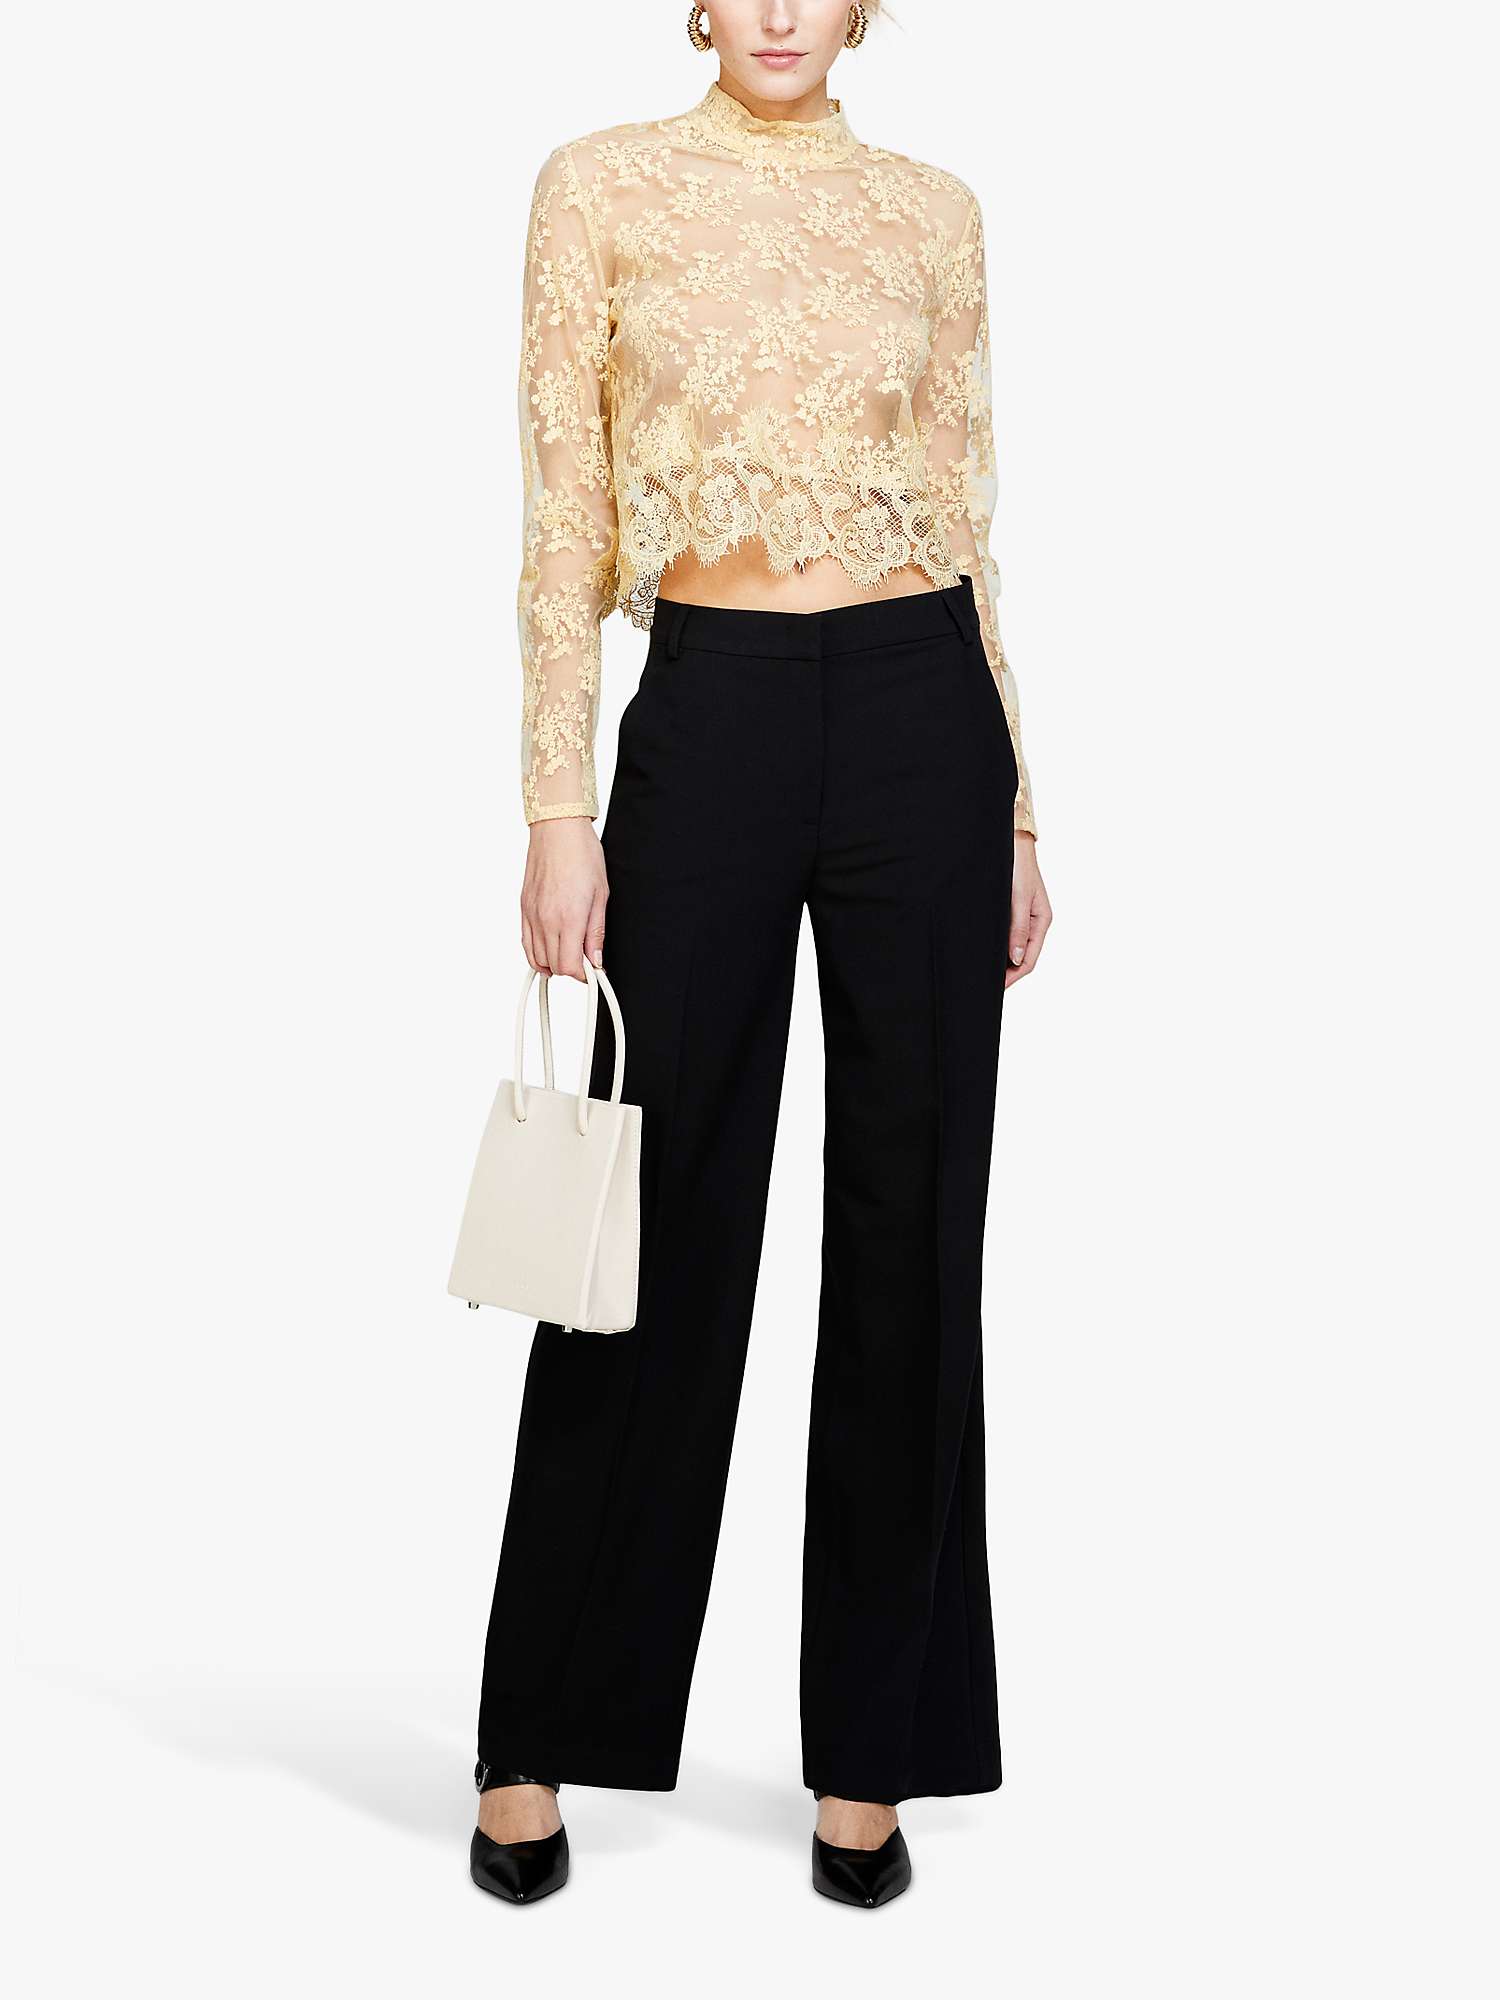 Buy SISLEY Flare Fit Stretch Trousers Online at johnlewis.com